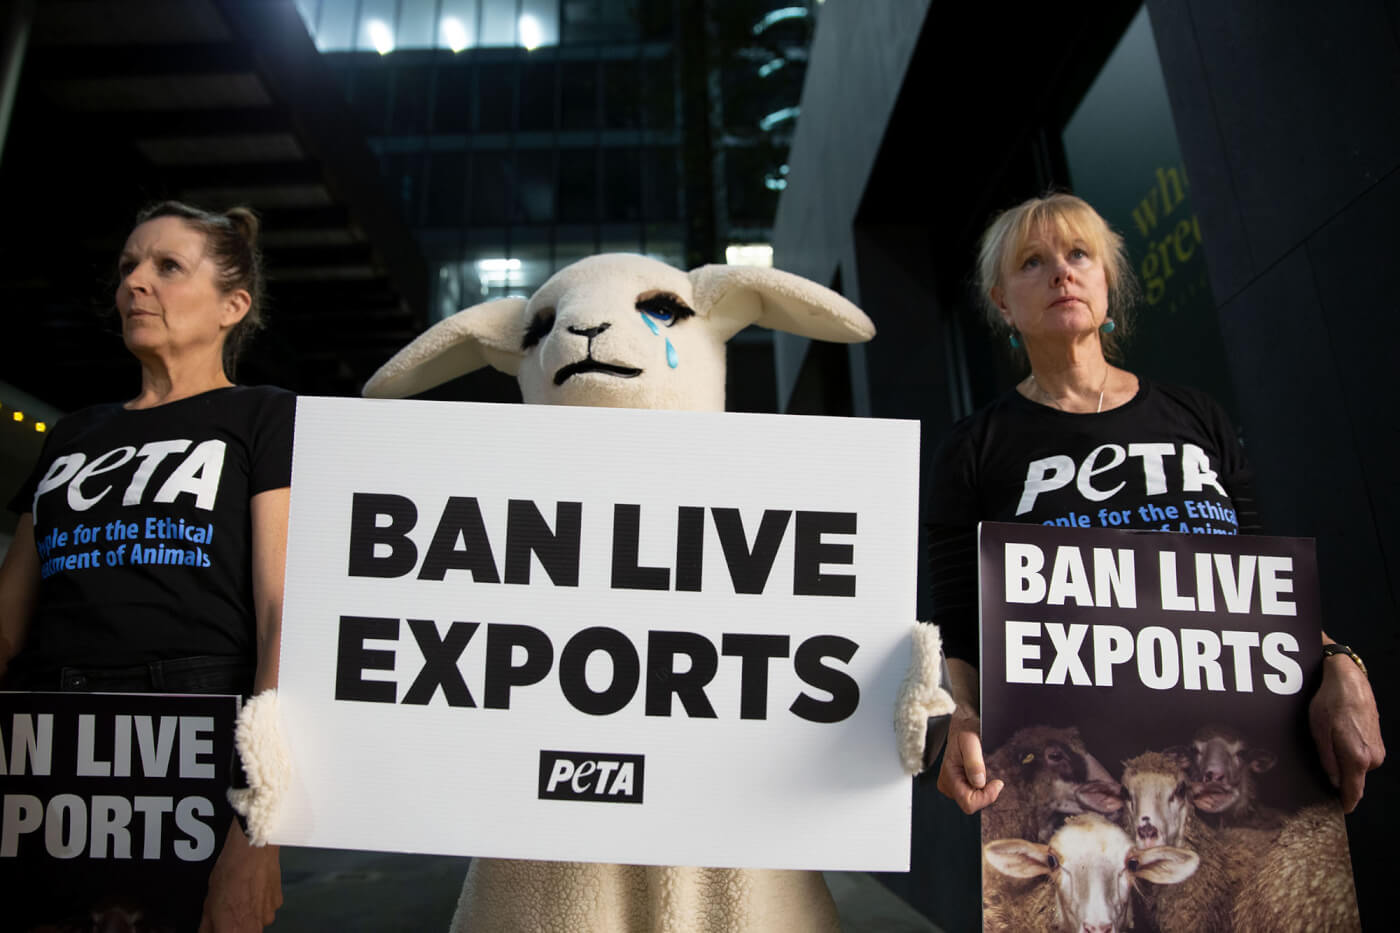 Lucy the Live-Export Sheep Hits the Campaign Trail